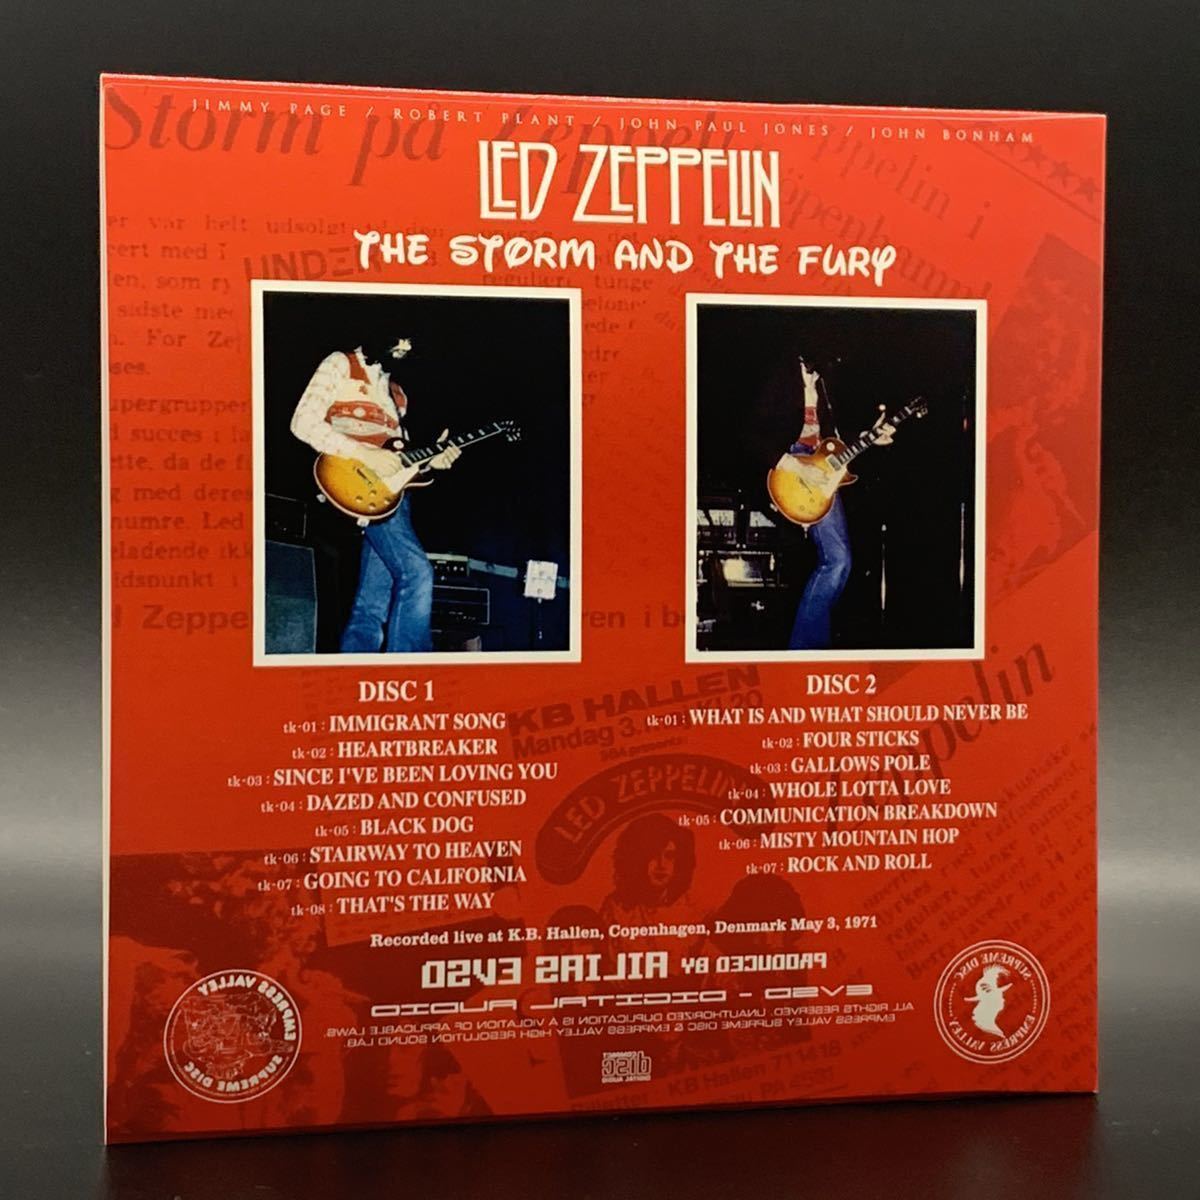 LED ZEPPELIN : THE STORM AND THE FURY 「嵐のレッド・ツェッペリン」 3CD 工場プレス銀盤CD ■欧米輸入限定盤　新品！_画像4